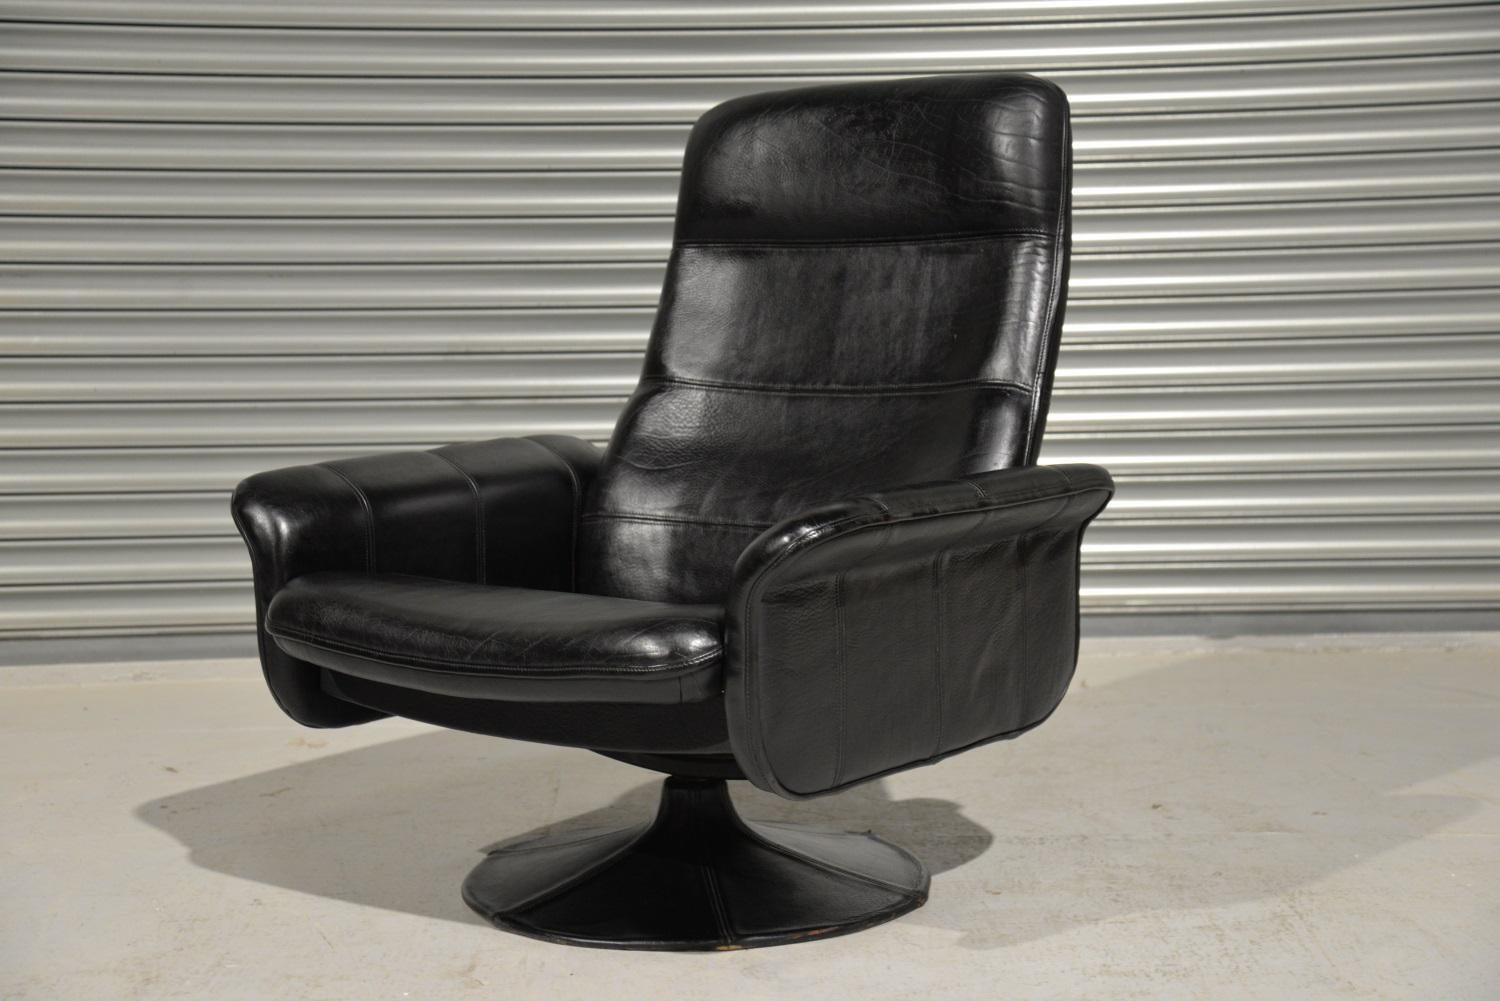 Discounted shipping rates for our US and International customers. ( from 2 weeks door to door ) 

We are delighted to bring to you a vintage De Sede DS 50 swivel lounge armchair in stunning black leather. Built in the 1970`s by De Sede craftsman in